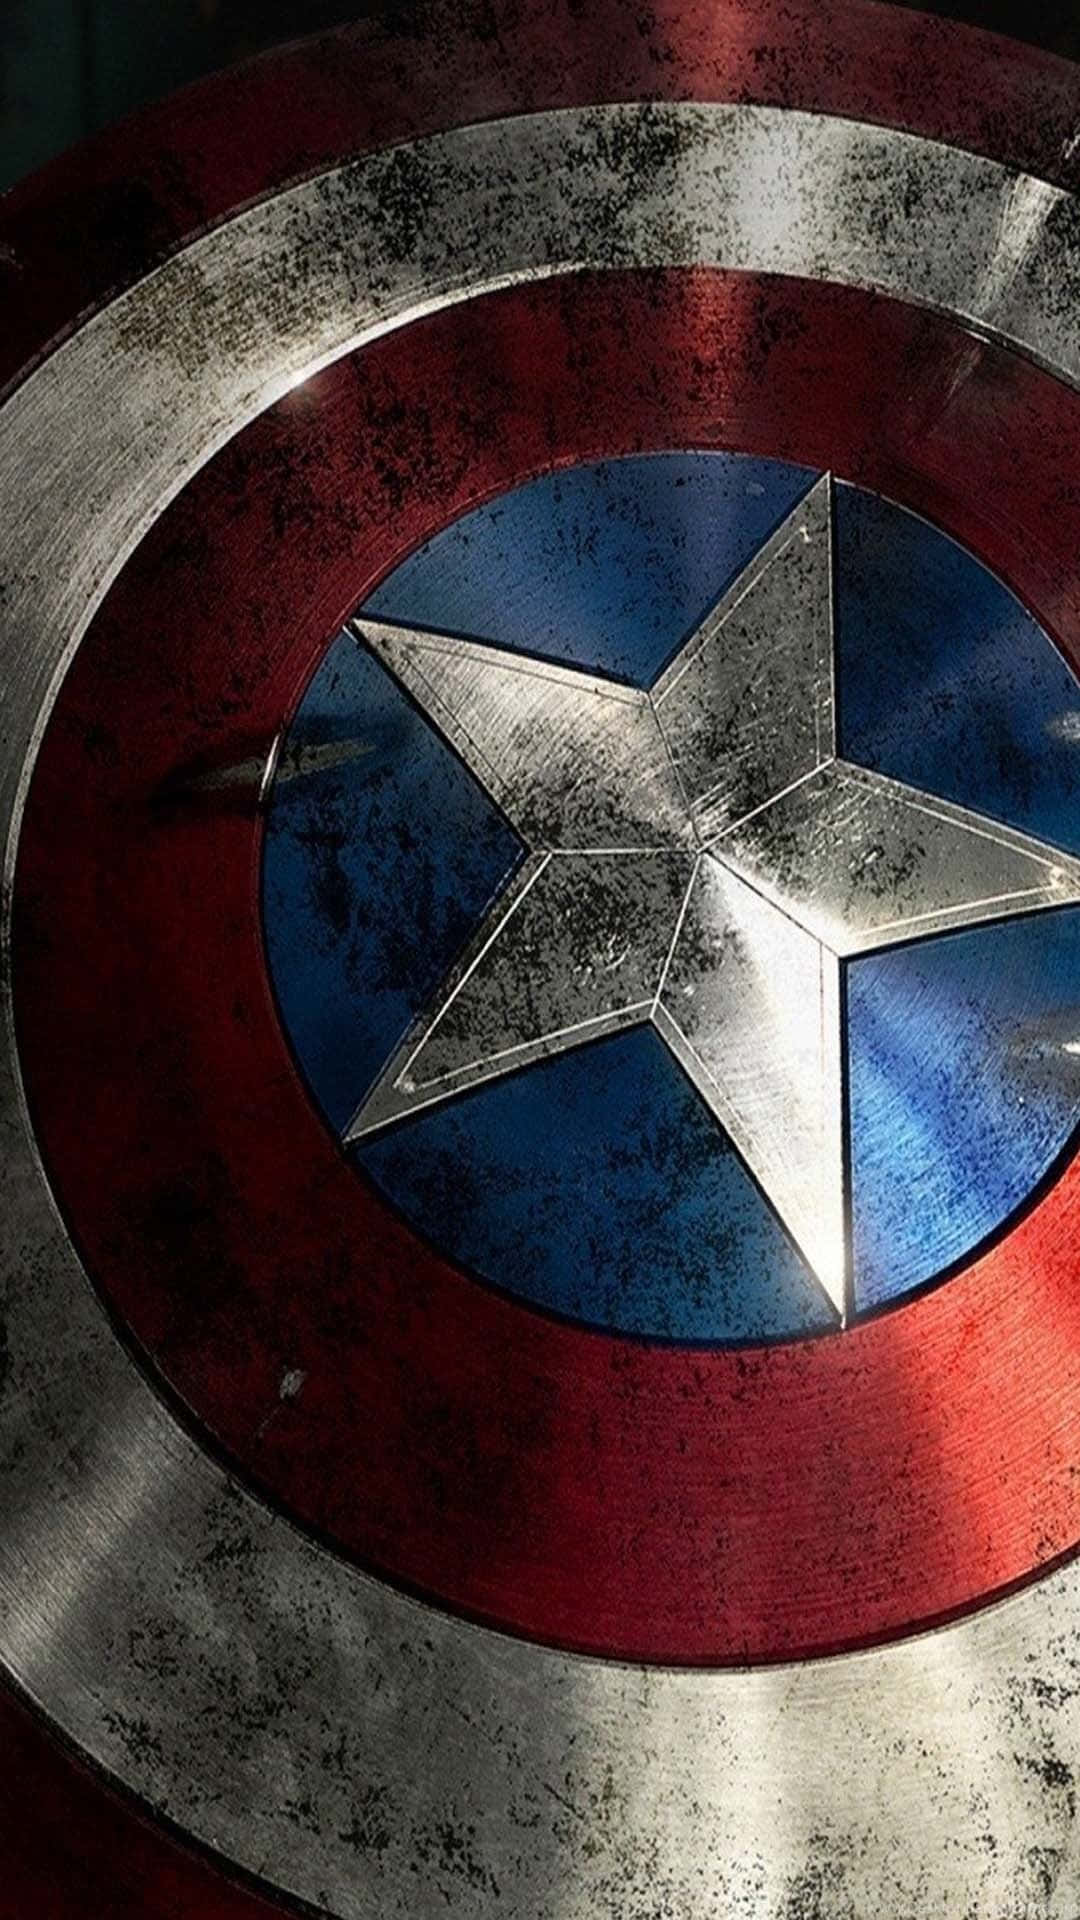 "The Android Avenger: Captain America in the Future" Wallpaper